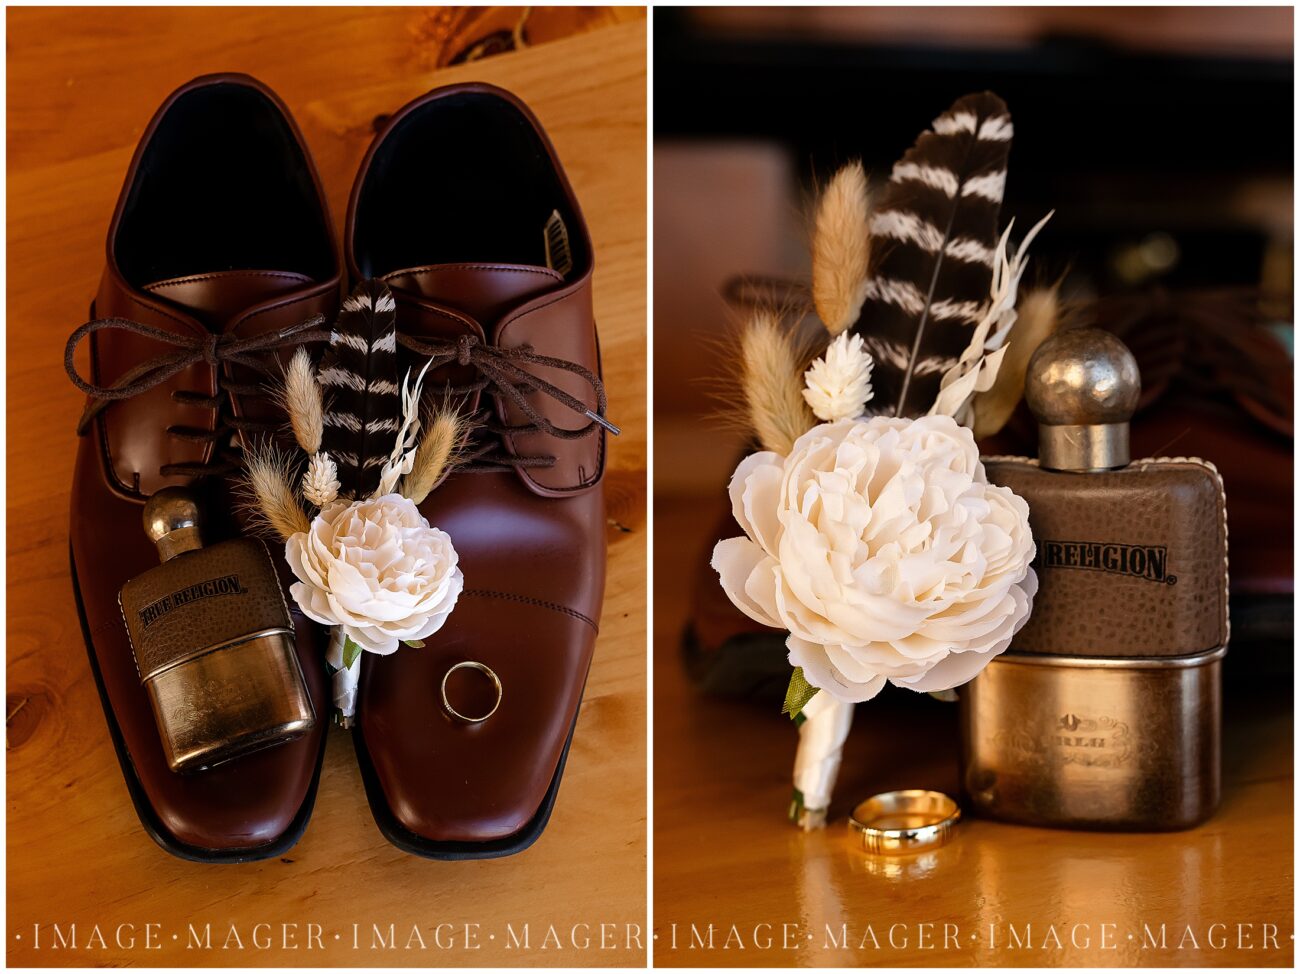 A small town wedding grooms detail shots. His shoes with his boutonnière, ring, and cologne.

L'erable, IL. Photo taken by Mager Image Photography.